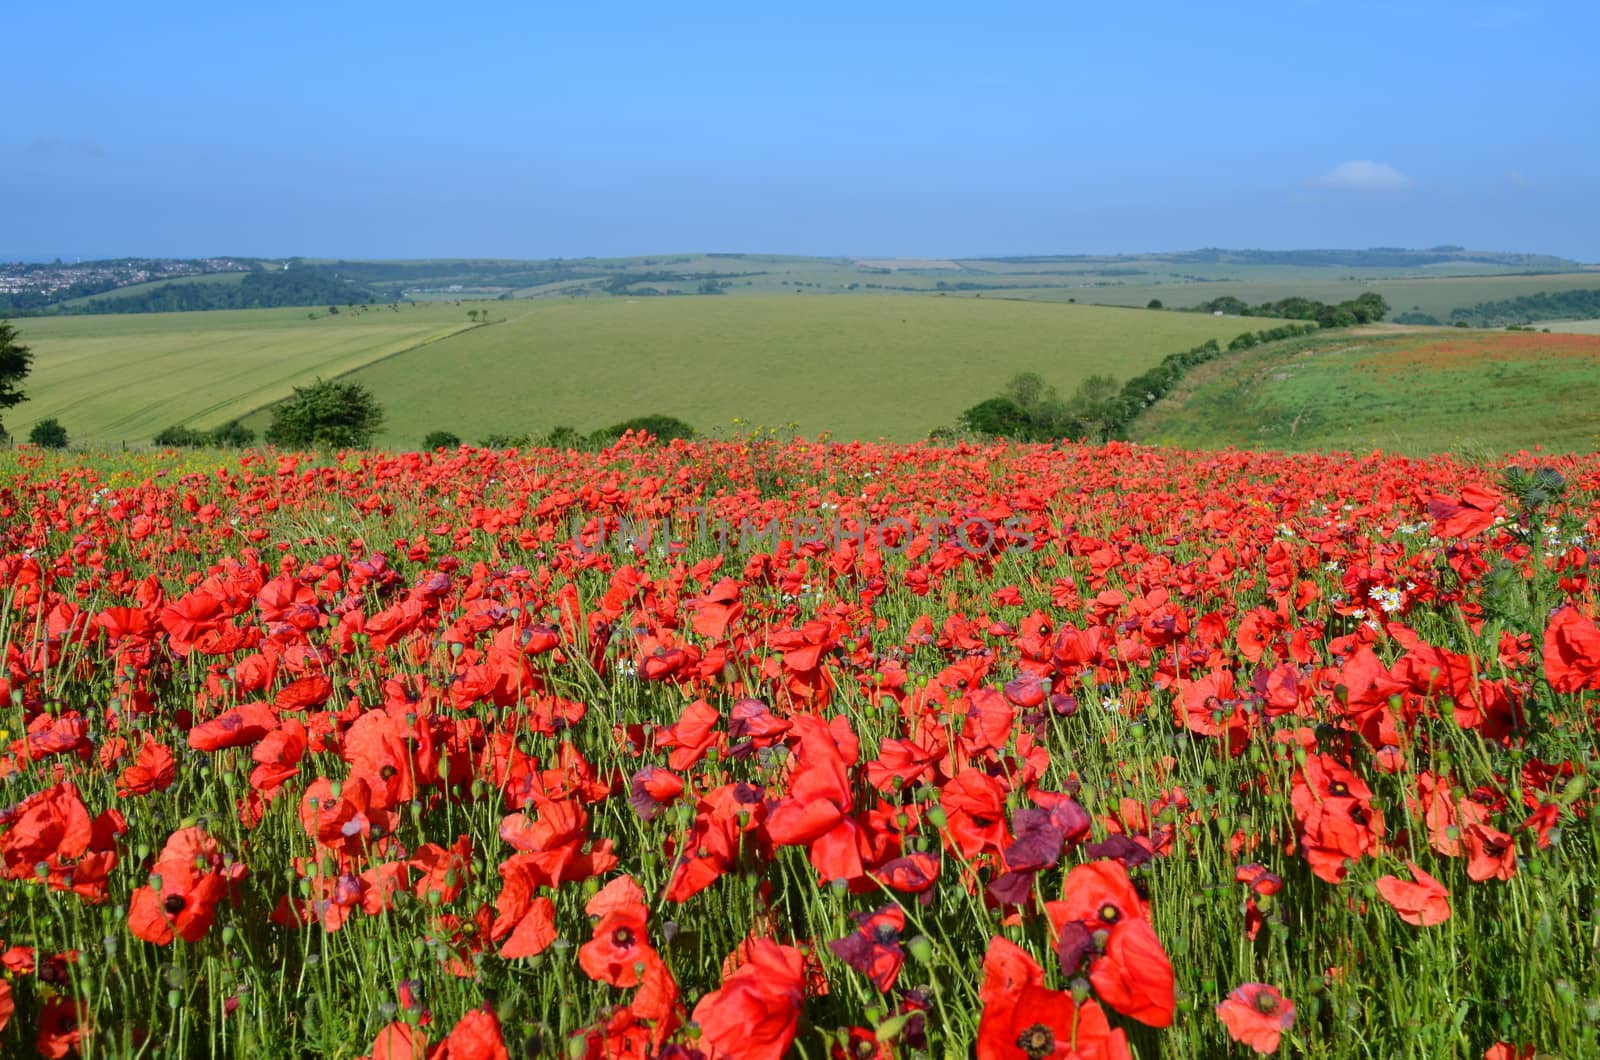 Red poppies on the South Downs National Park in Sussex,England.Shot taken mid morning in June 2013.